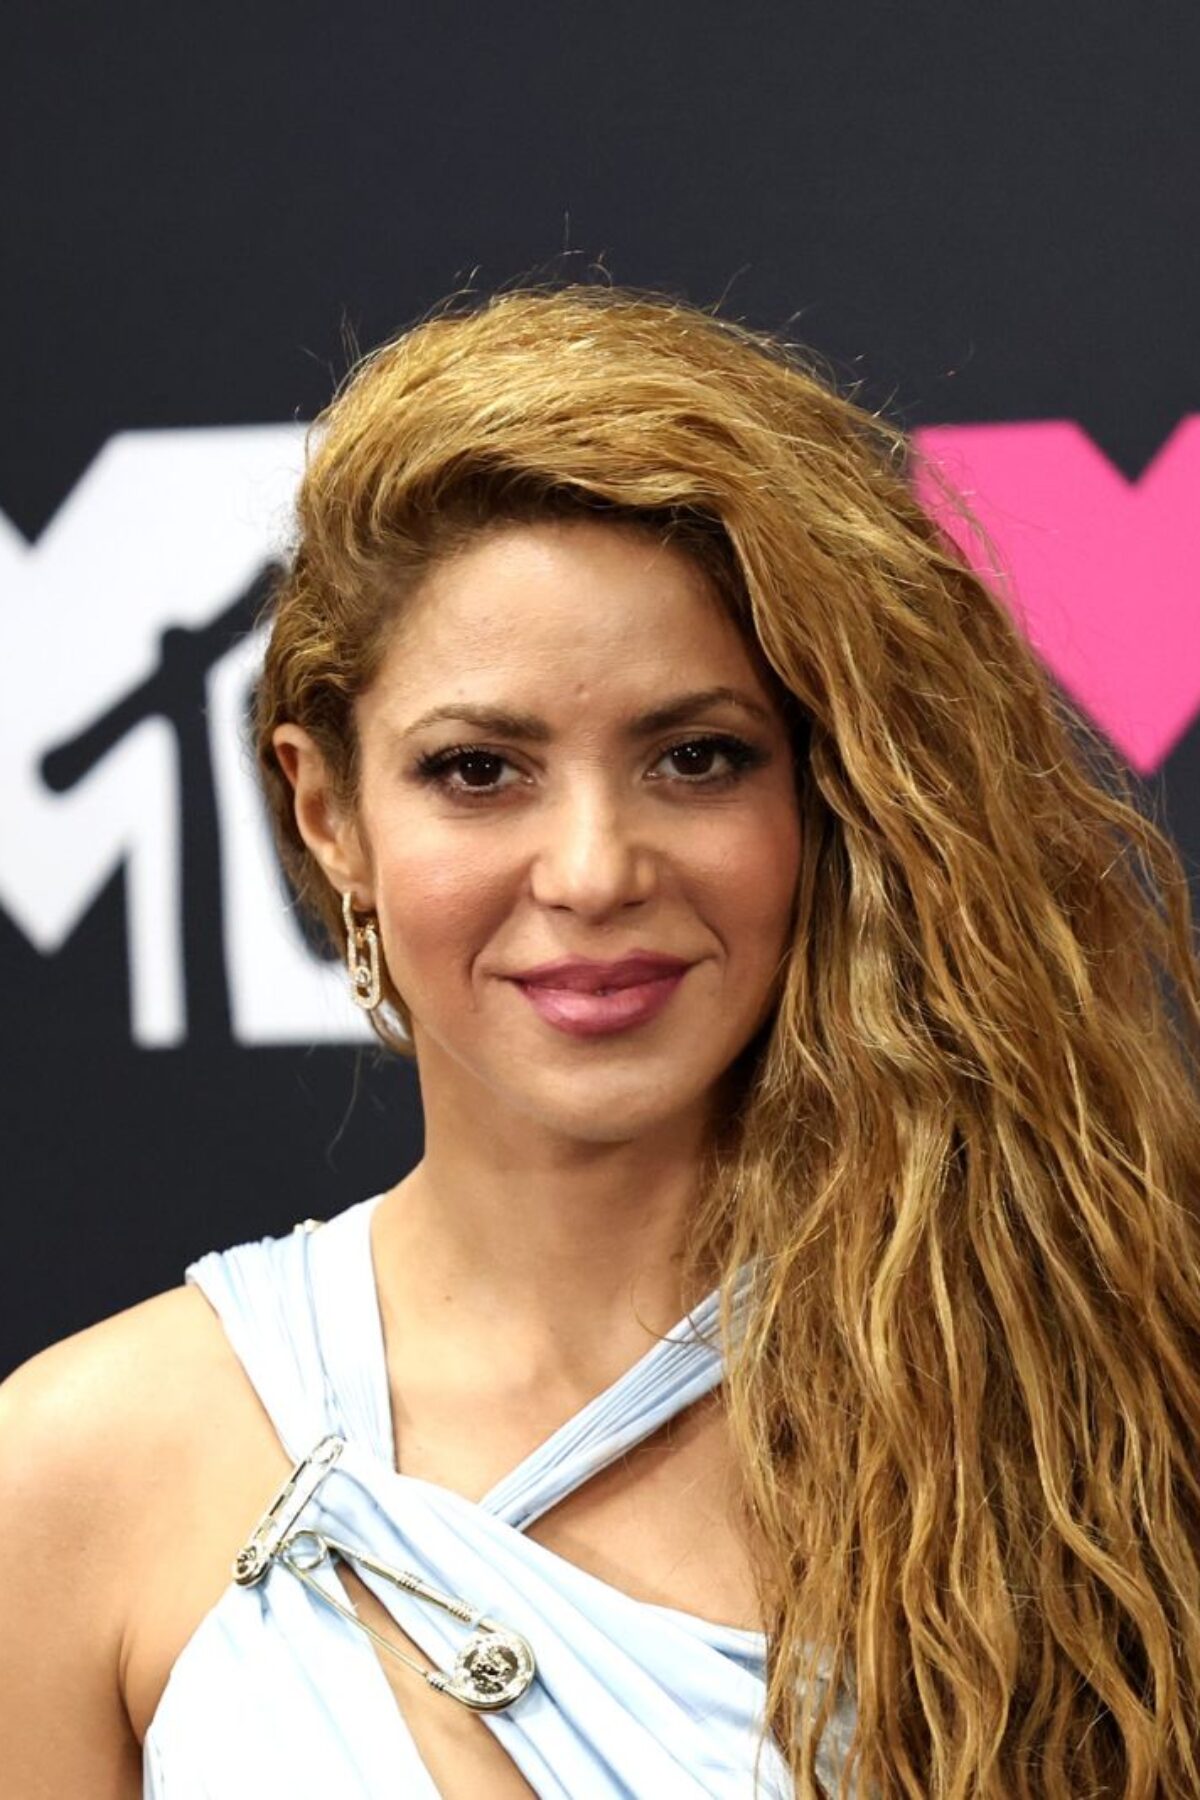 NEWARK, NEW JERSEY - SEPTEMBER 12: Shakira poses in the press room at the 2023 MTV Video Music Awards at Prudential Center on September 12, 2023 in Newark, New Jersey. (Photo by Jamie McCarthy/WireImage)